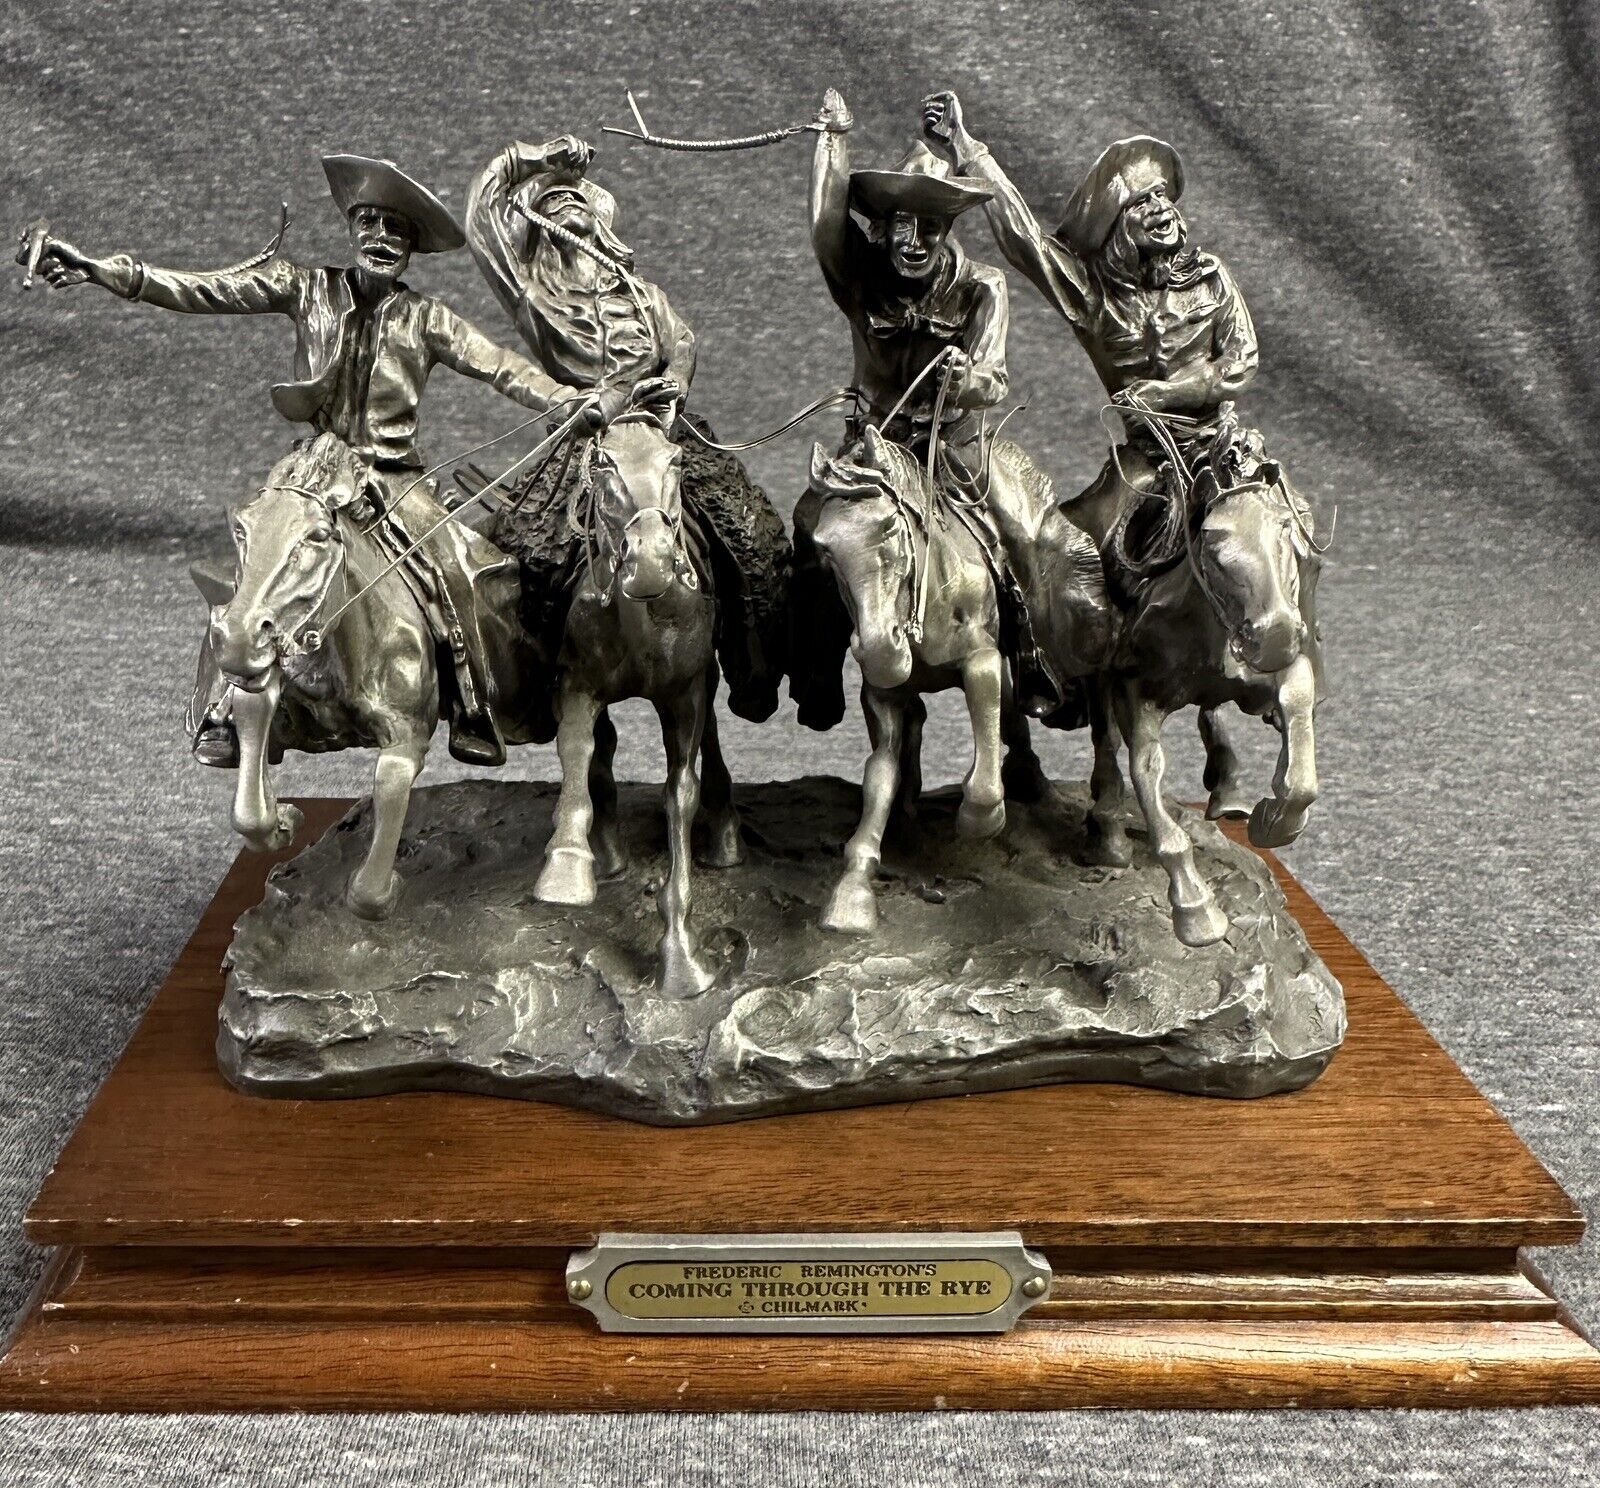 1987 CHILMARK Fine Pewter Schedule by Fredric Remington Limited Edition 1980’s